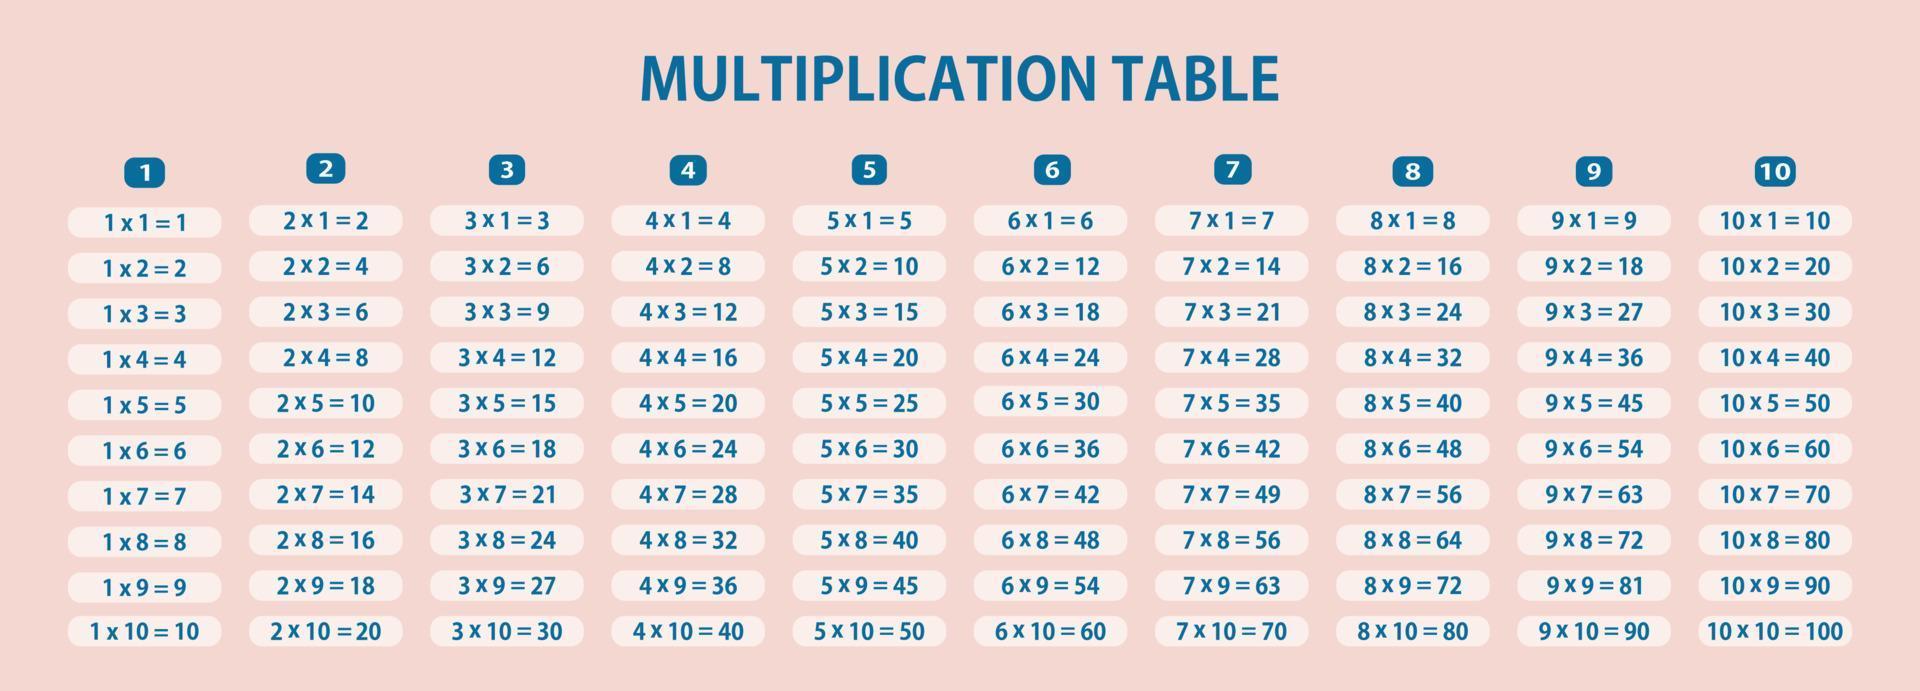 Multiplication table. Times tables. Graphic design. vector